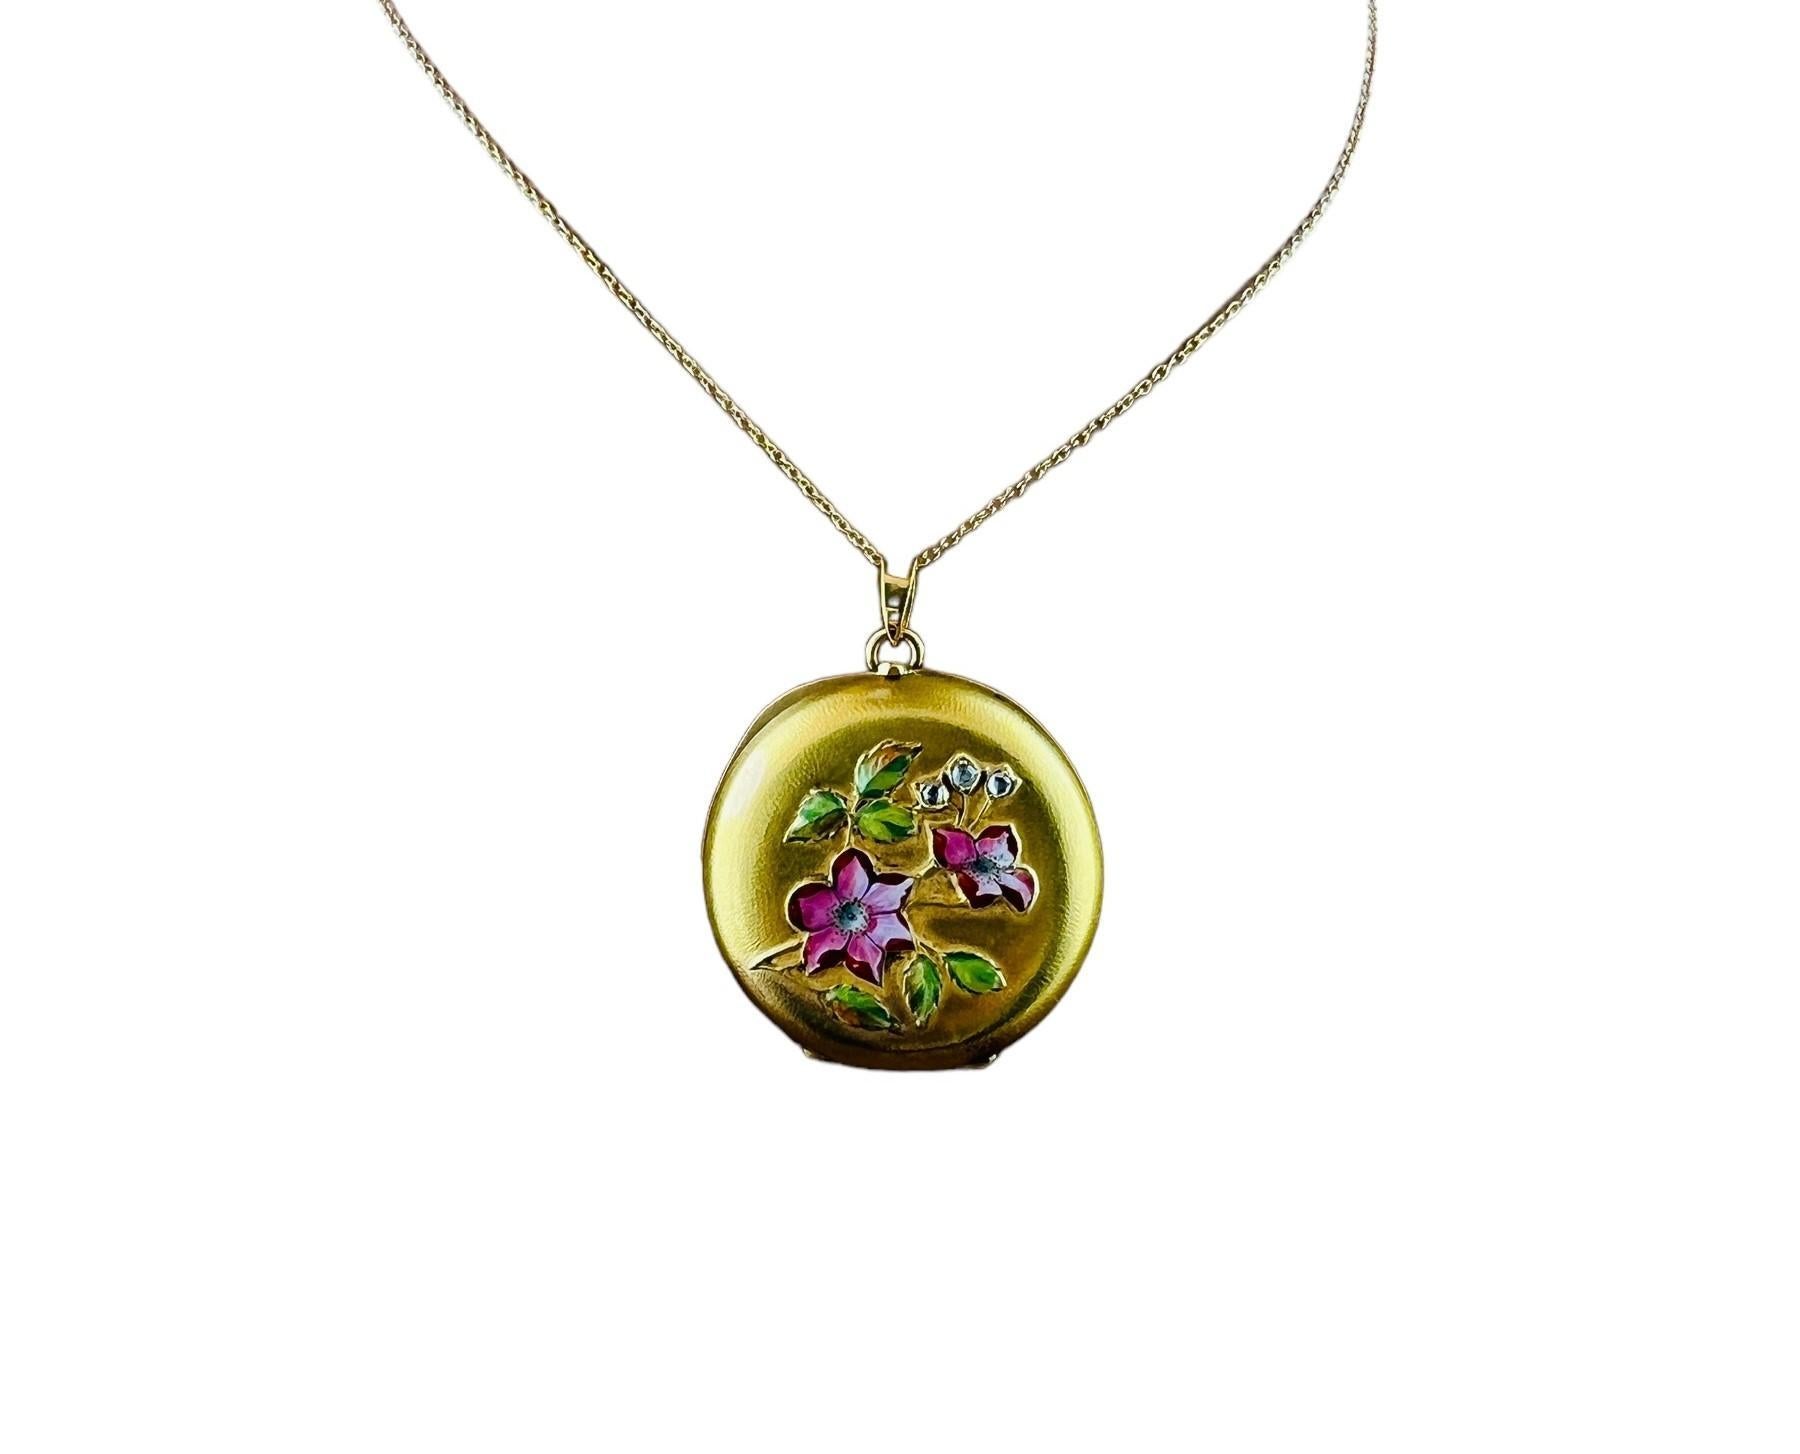 18K Yellow Gold and Enamel Round Locket with Floral Design #16549 For Sale 8